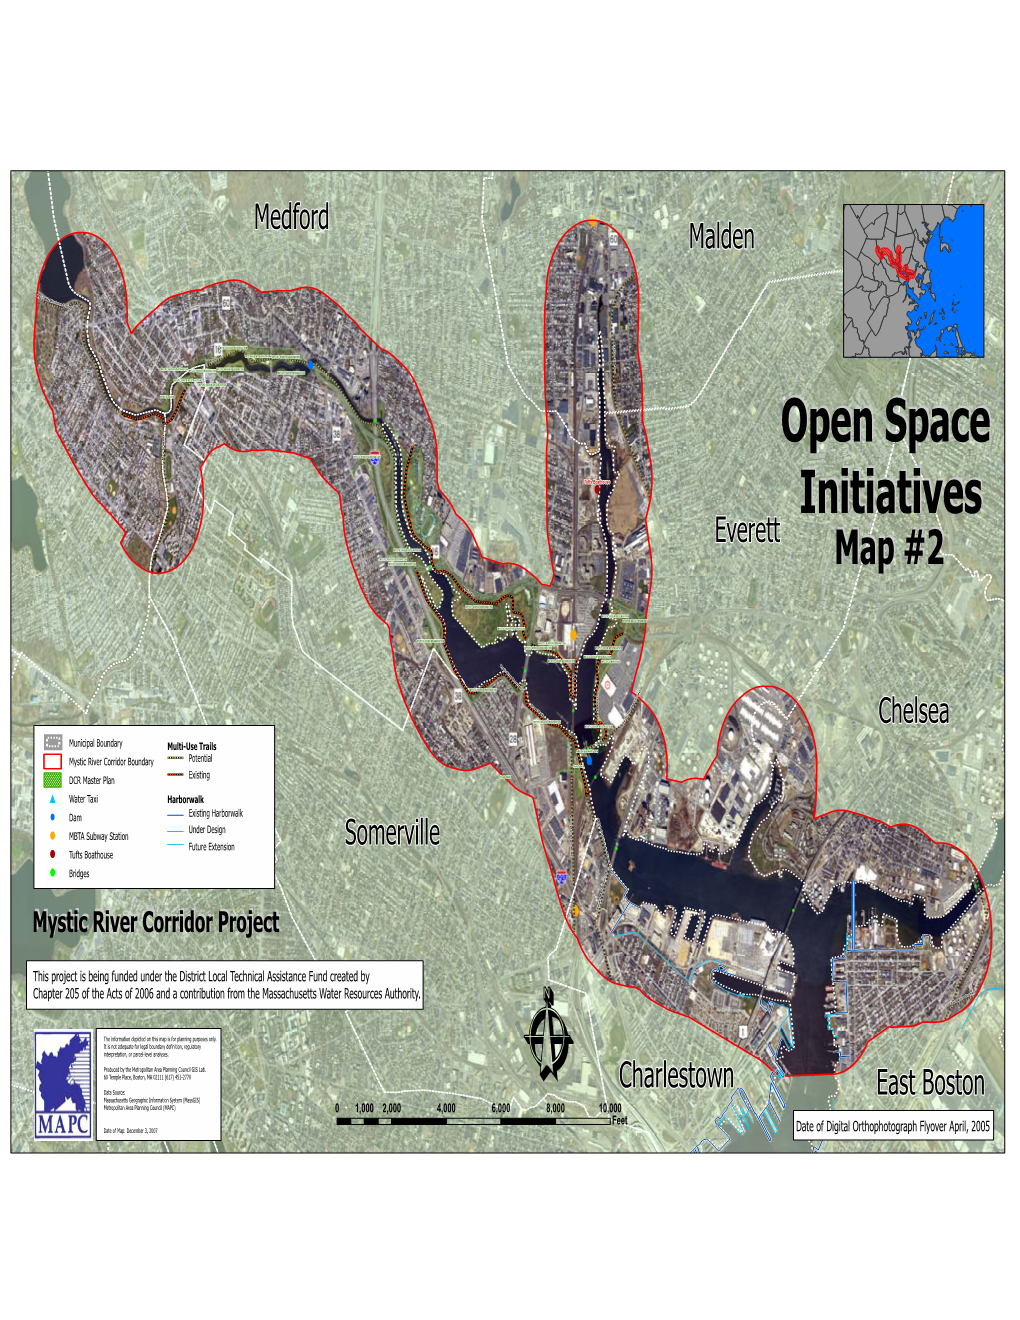 Open Space Initiatives